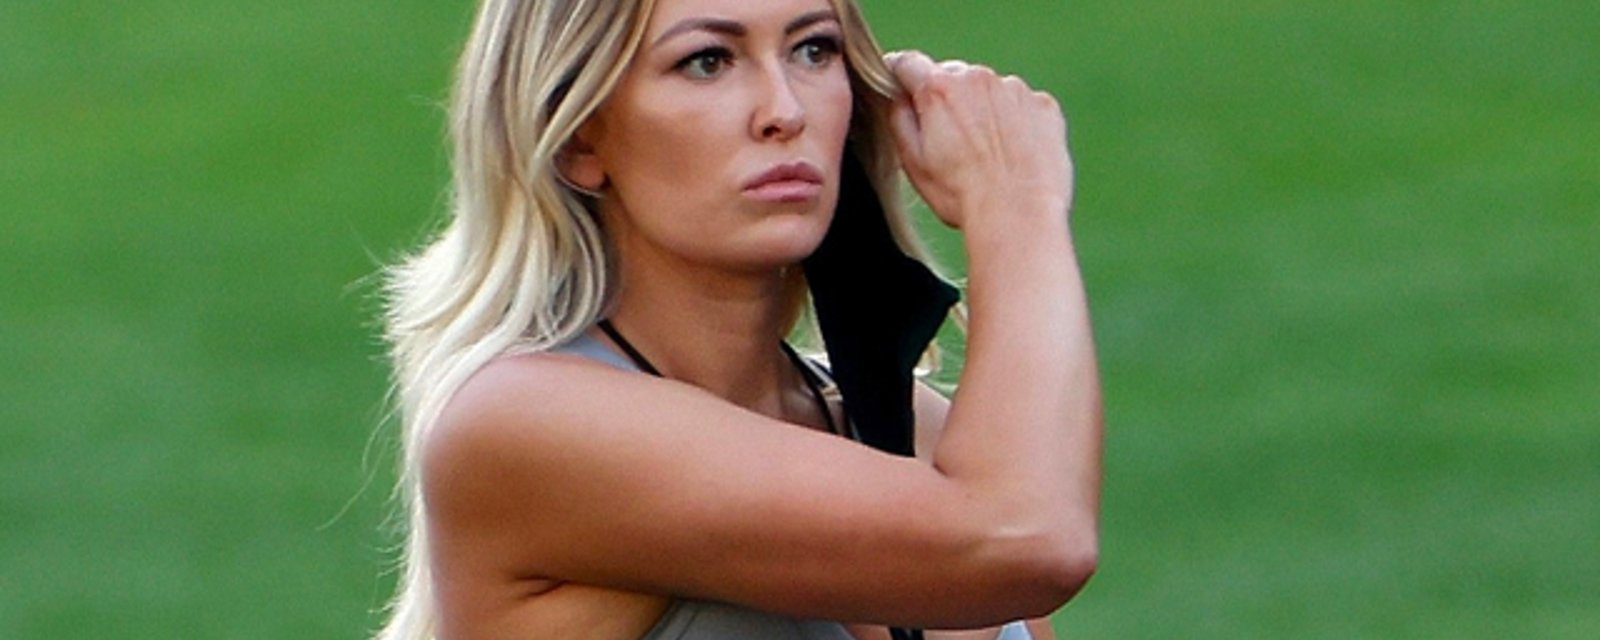 Paulina Gretzky attends Masters in support of fiancé Dustin Johnson